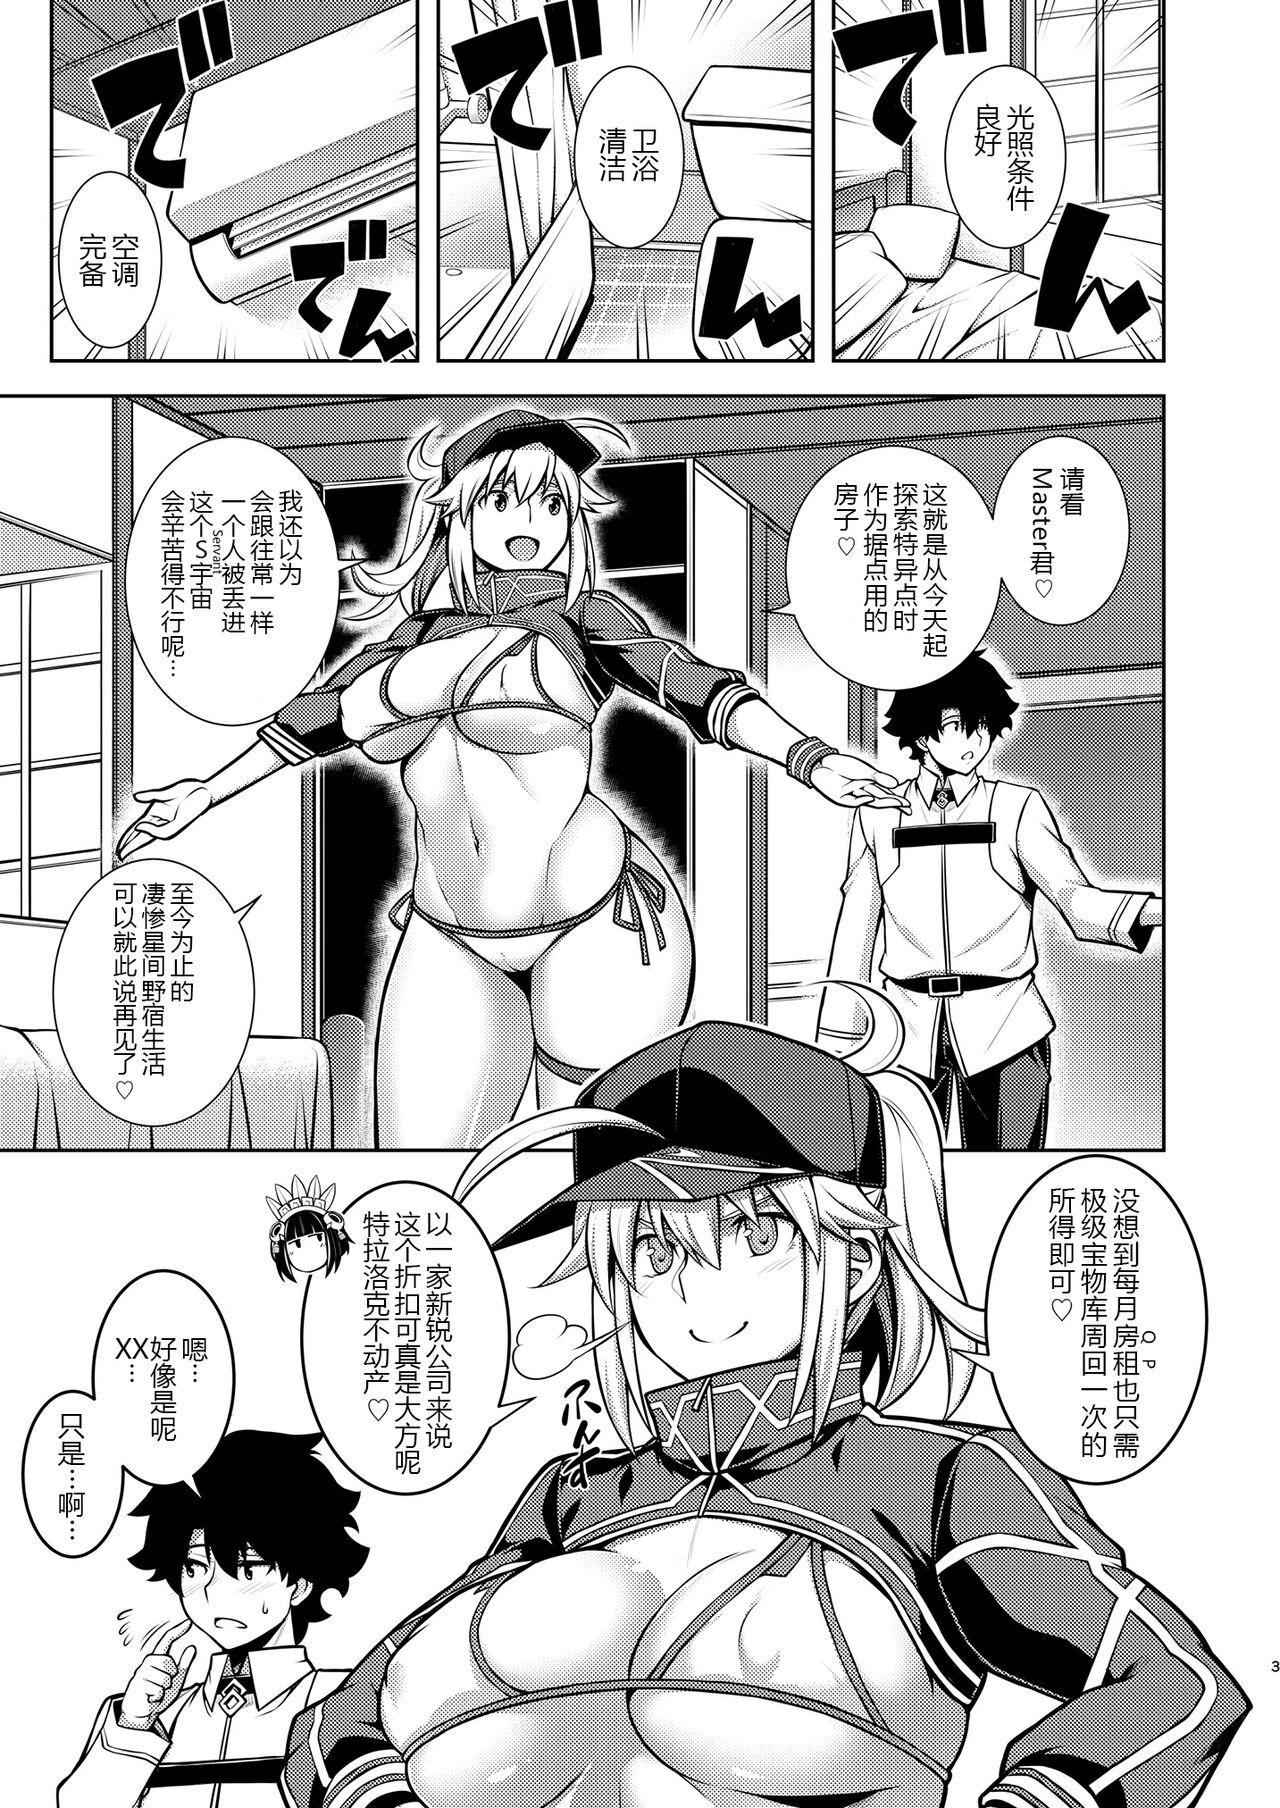 Mexican ONE ROOM - Fate grand order Mas - Page 4